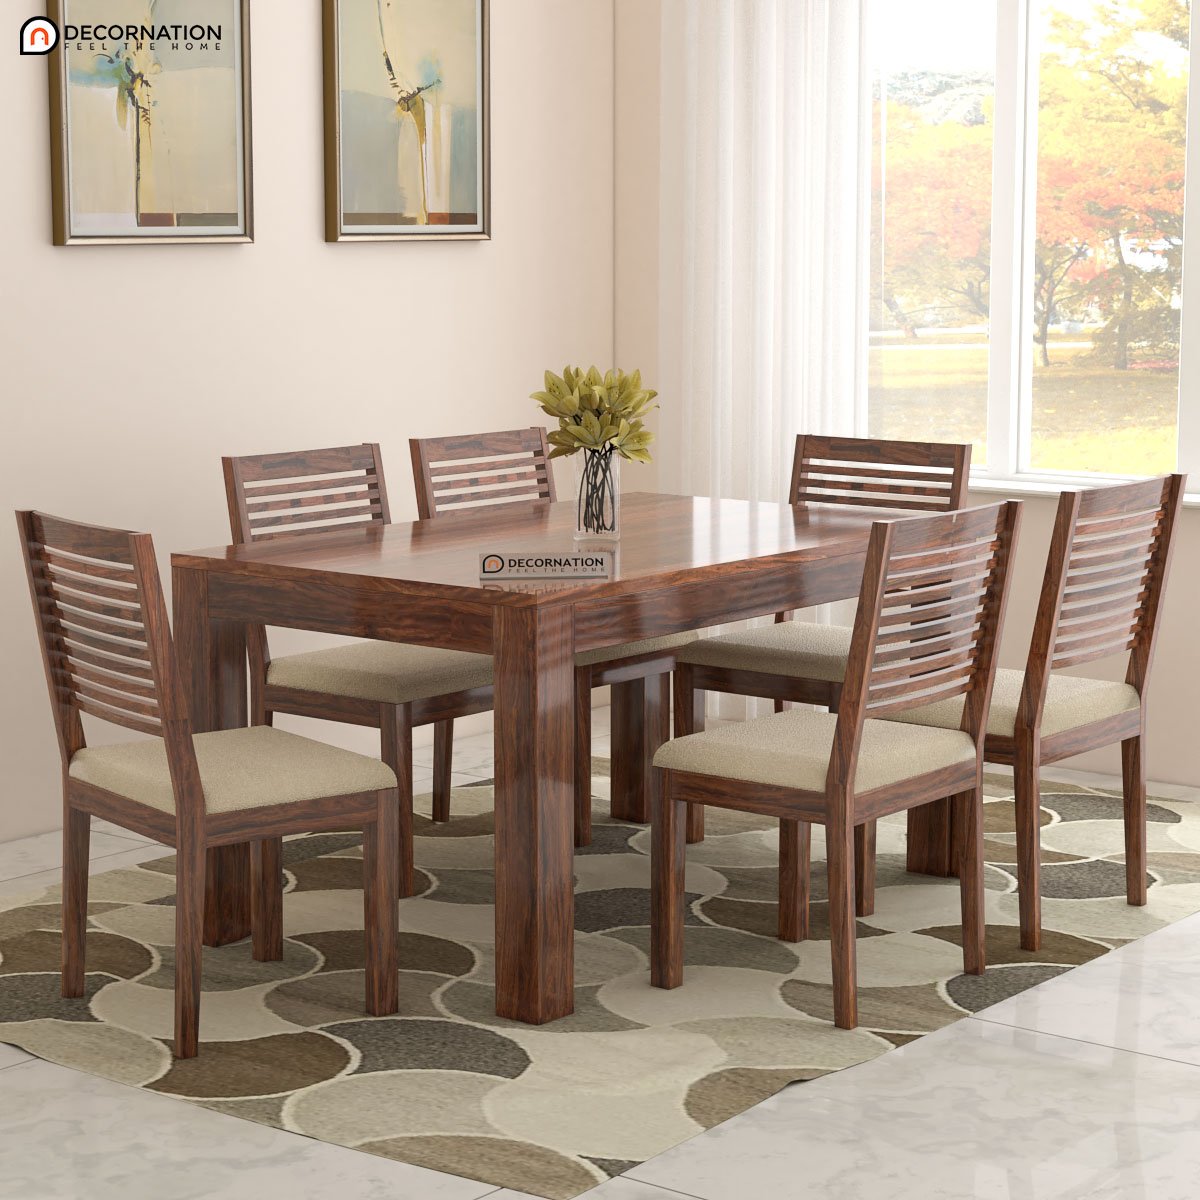 Blankenberge Wooden 6 Seater Dining Table Set